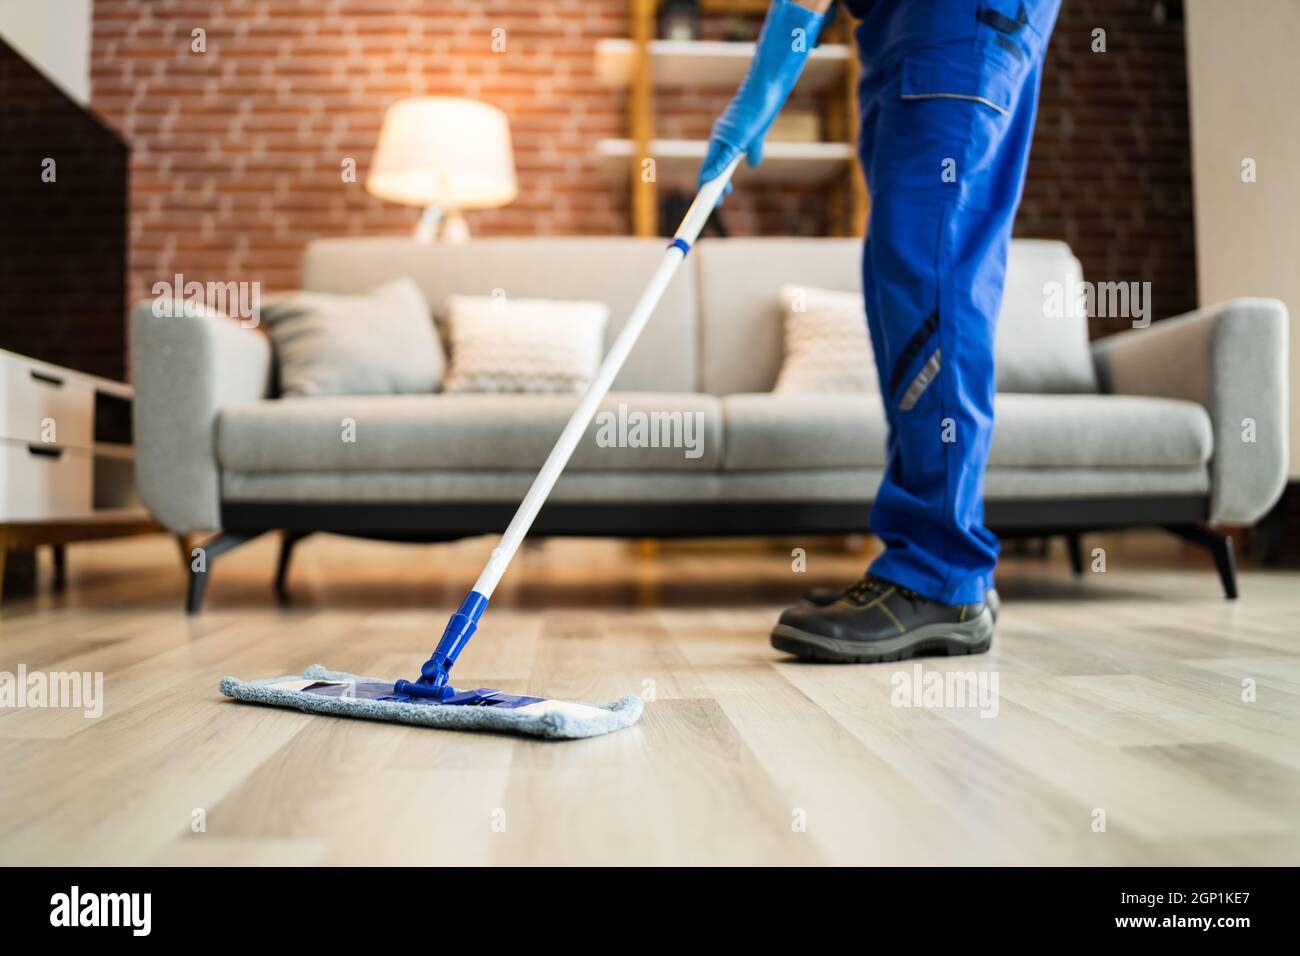 Home Floor Cleaning Service. Man Mopping Living Room Stock Photo